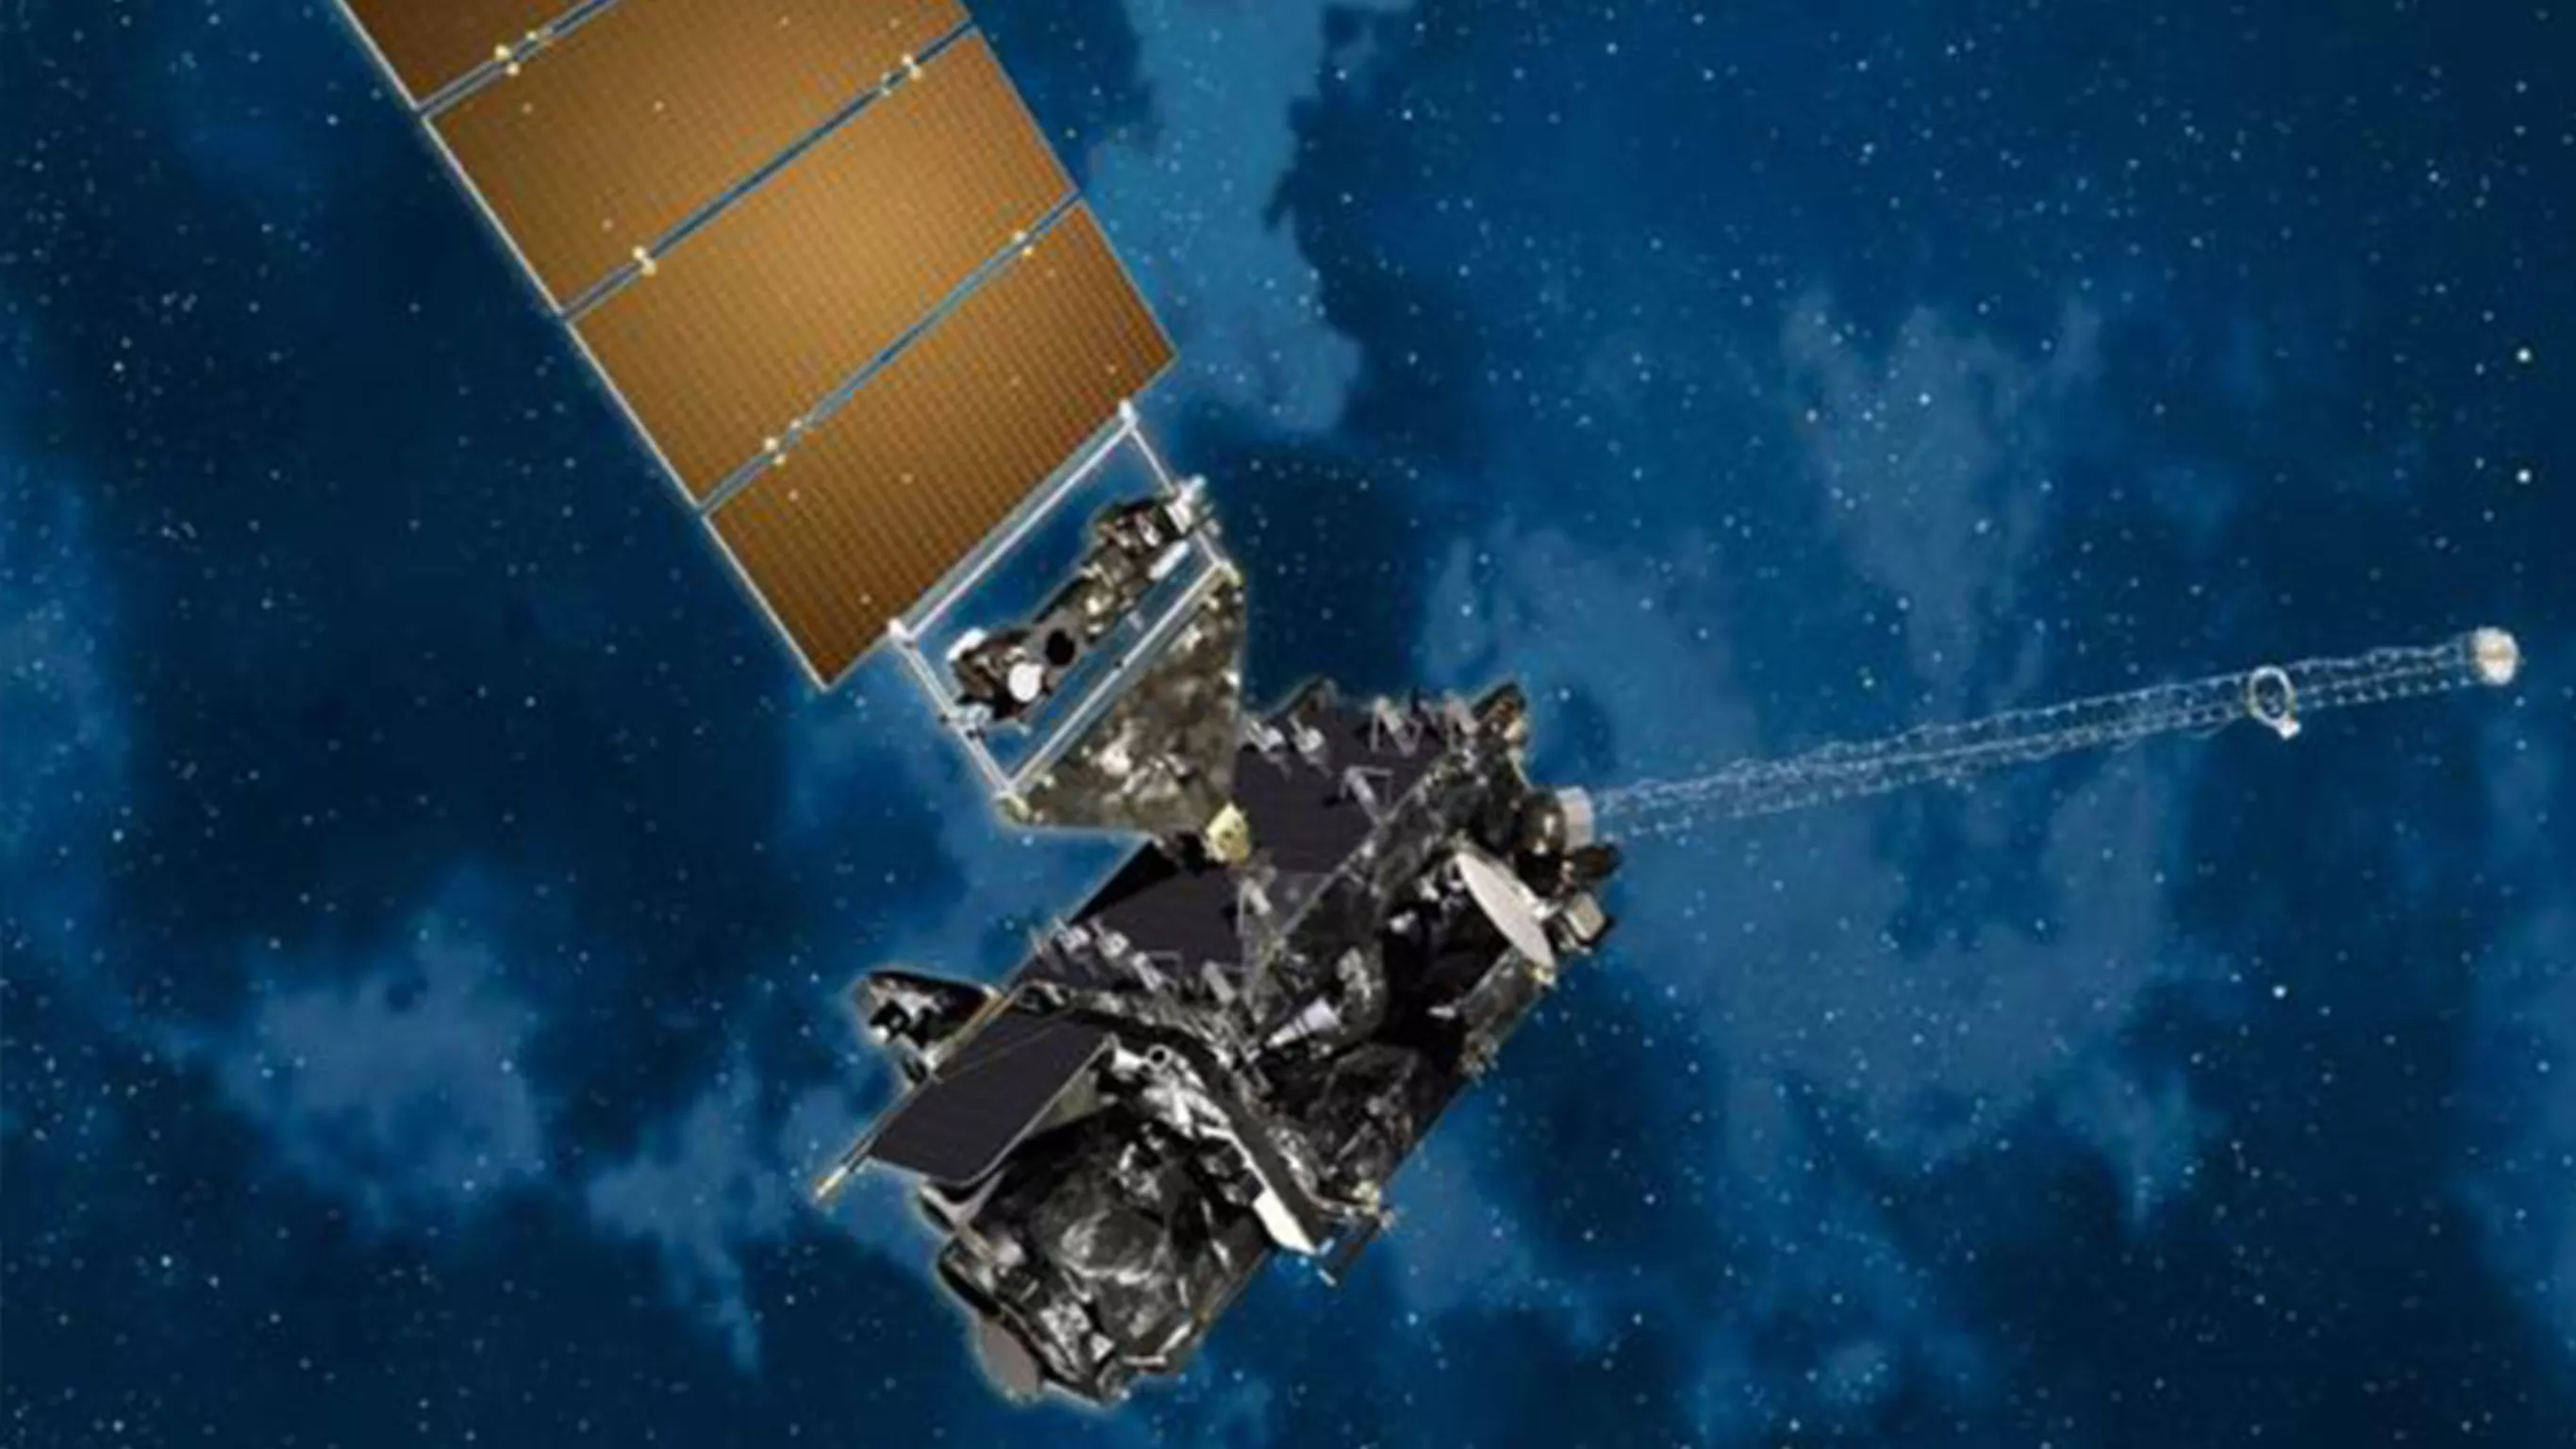 Illustration of GOES-17 satellite in outer space.